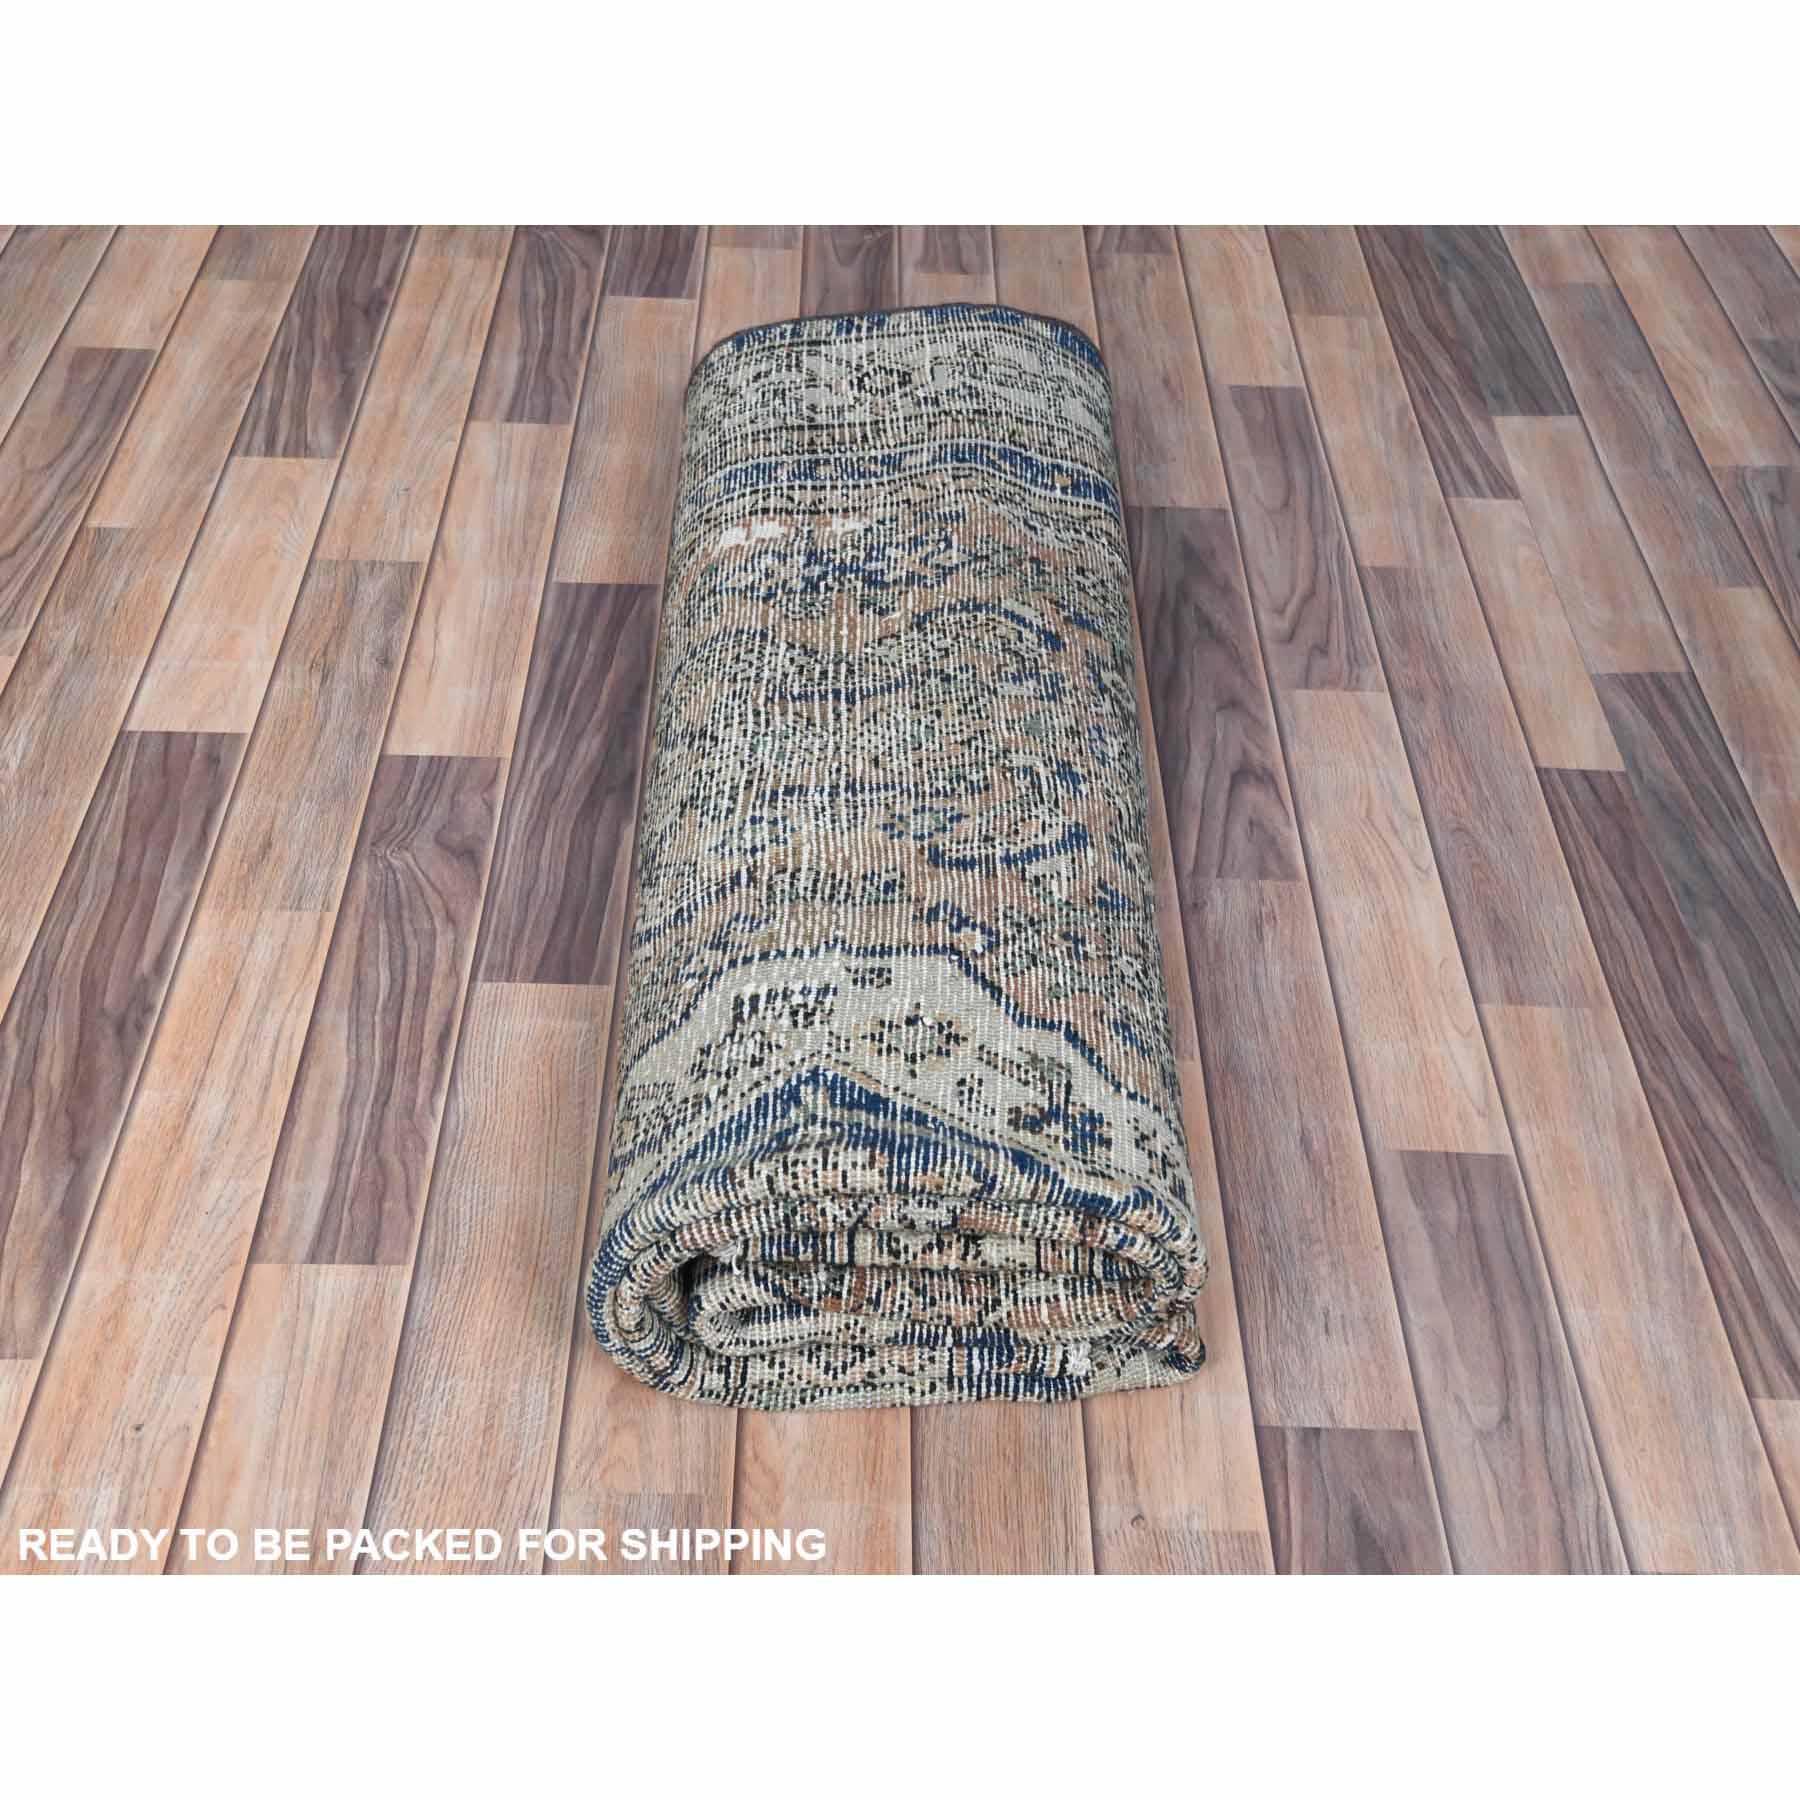 Overdyed-Vintage-Hand-Knotted-Rug-405970